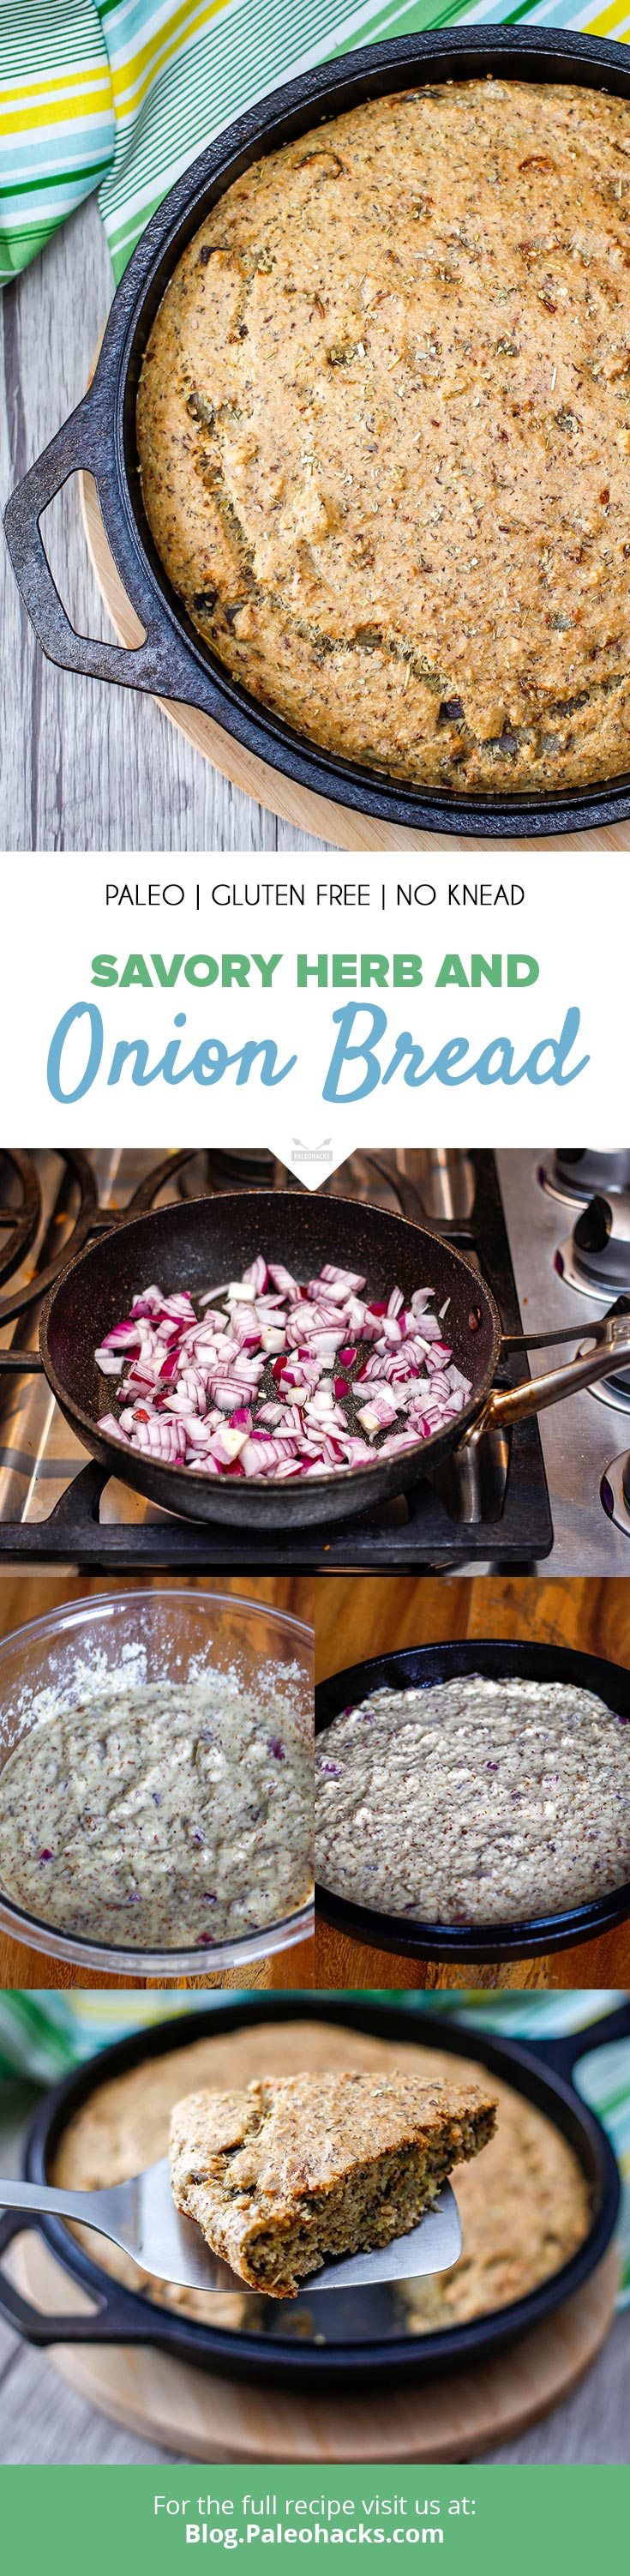 Simply prep, mix, and pop in the oven for a gluten-free Herb and Onion Bread you can serve with your favorite soups and salads.